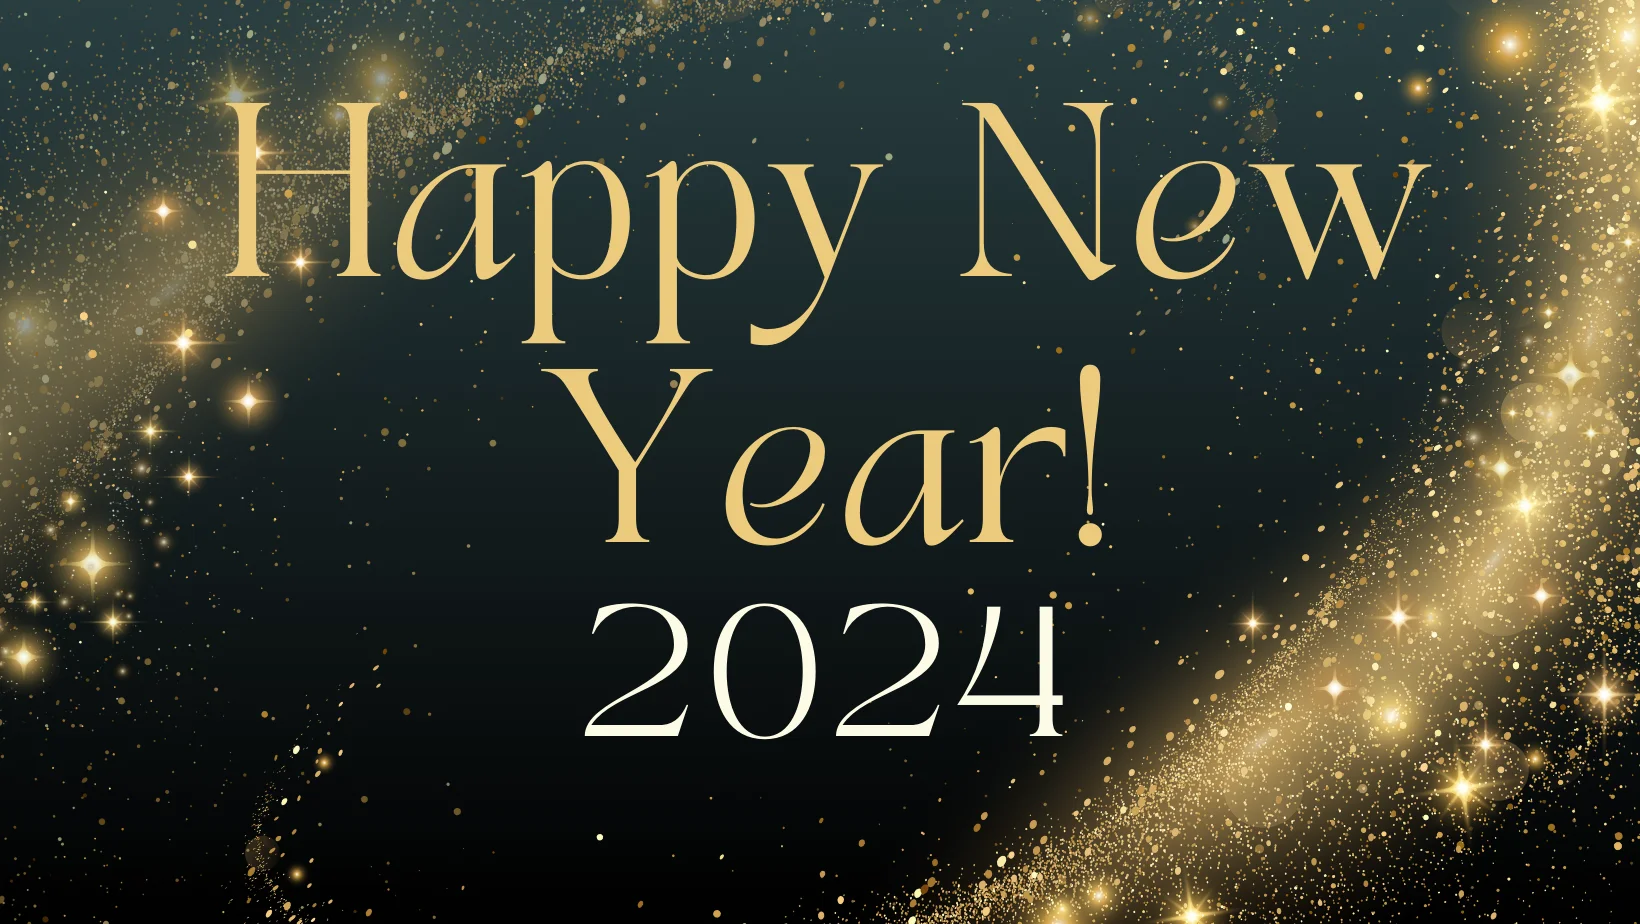 Black and Gold Elegant Happy New Year Facebook Cover 5